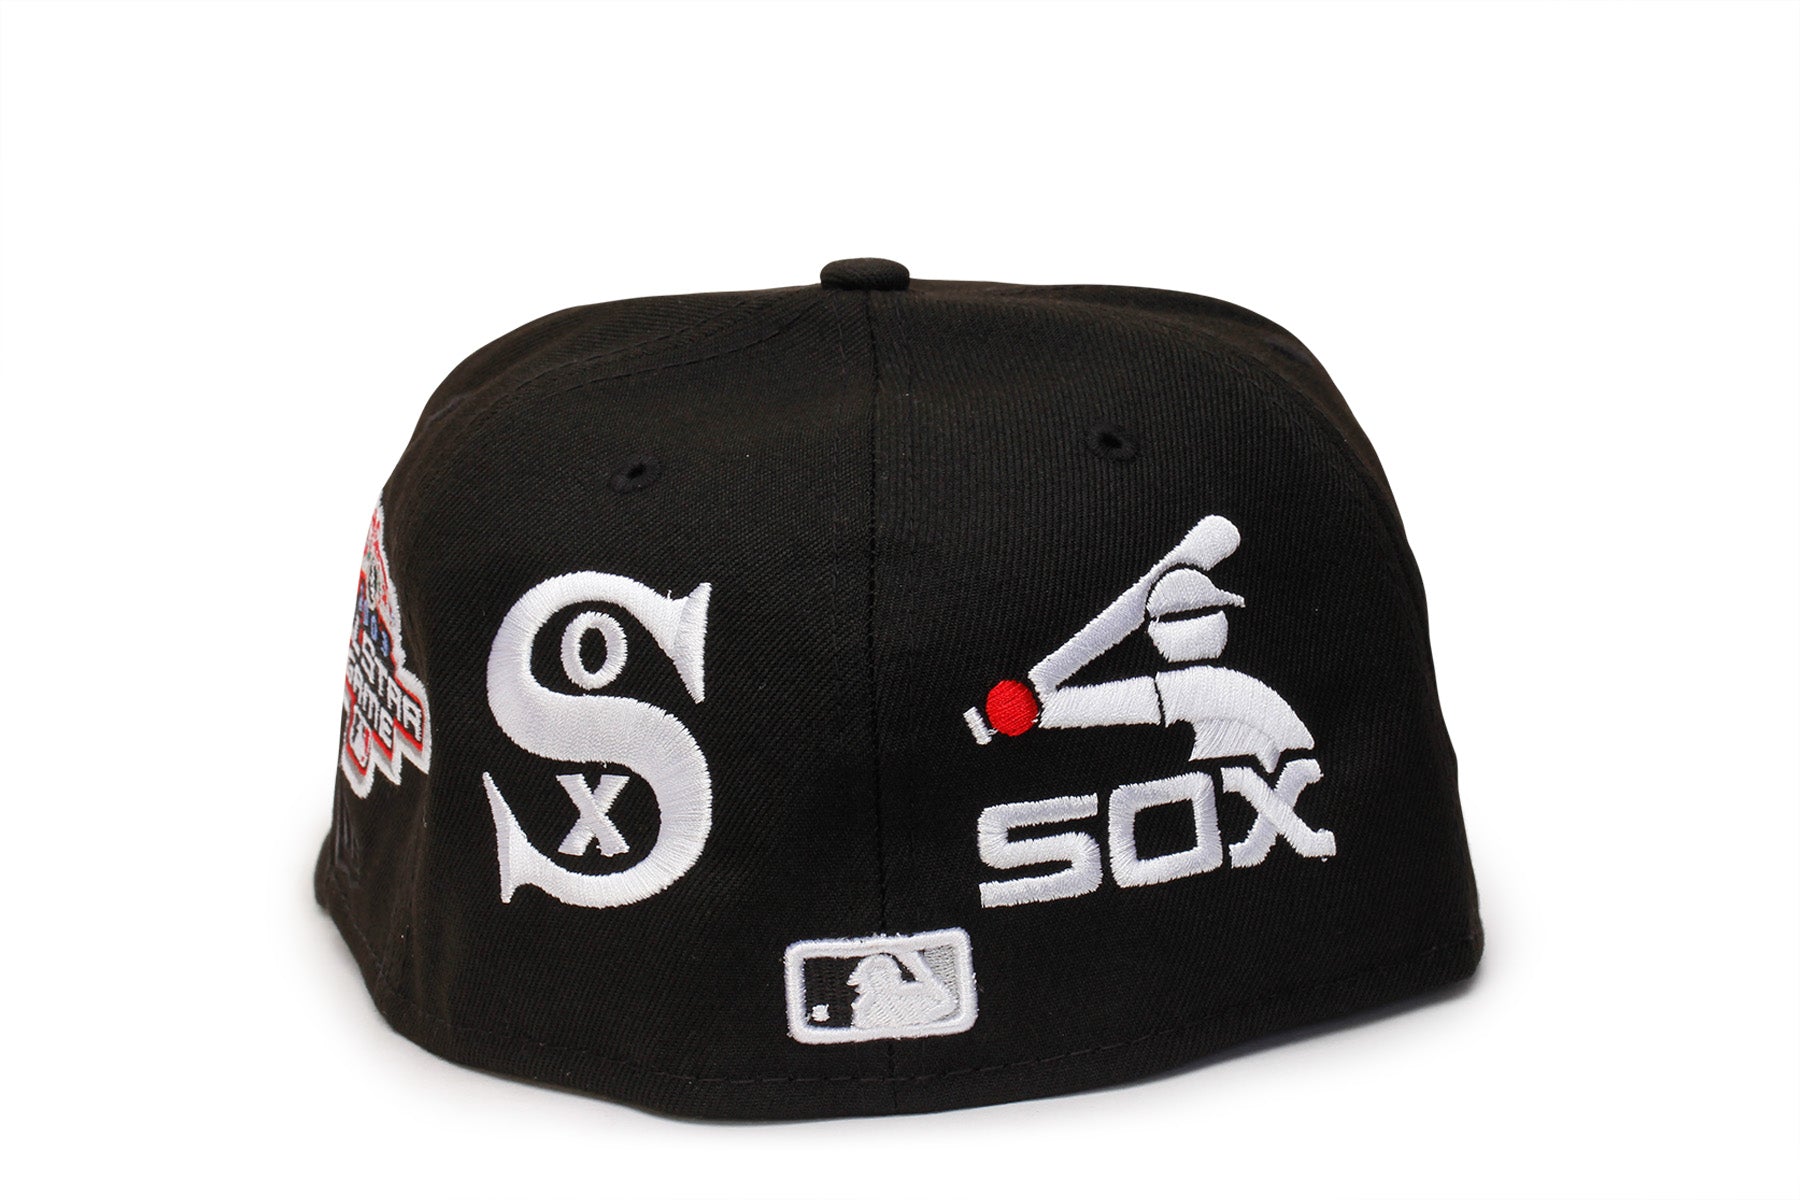 Chicago White Sox New Era Patch Pride 59FIFTY Fitted Hat - Black